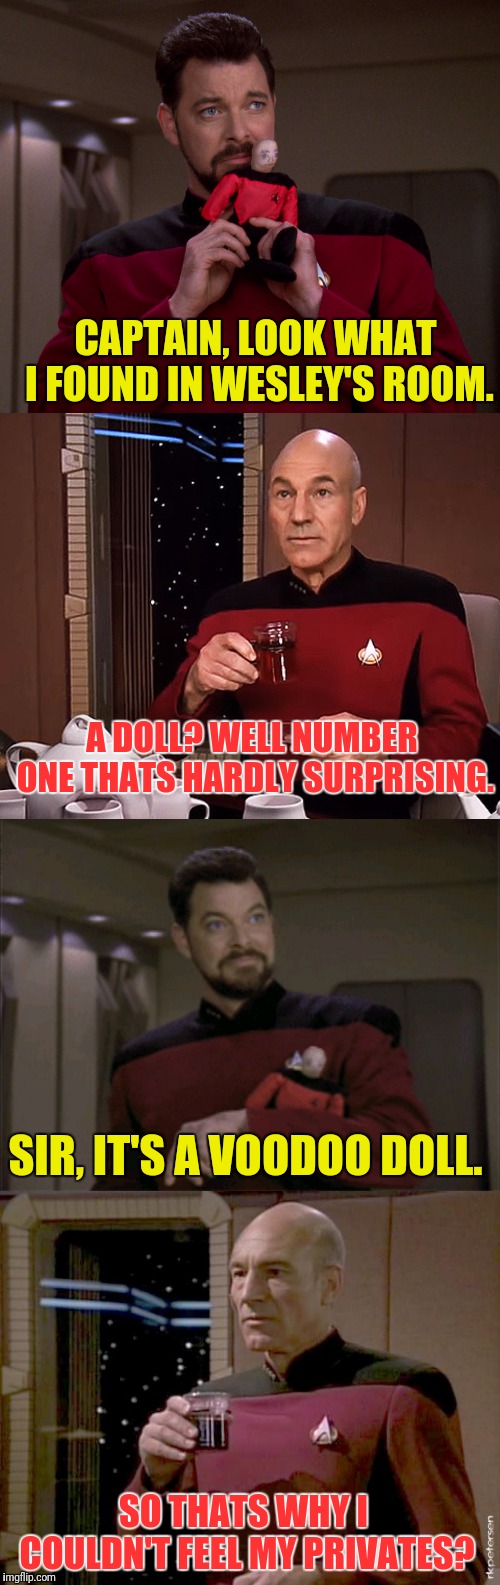 Voodoo Doll Picard | CAPTAIN, LOOK WHAT I FOUND IN WESLEY'S ROOM. A DOLL? WELL NUMBER ONE THATS HARDLY SURPRISING. SIR, IT'S A VOODOO DOLL. SO THATS WHY I COULDN'T FEEL MY PRIVATES? | image tagged in star trek the next generation,wesley crusher,curse,captain picard | made w/ Imgflip meme maker